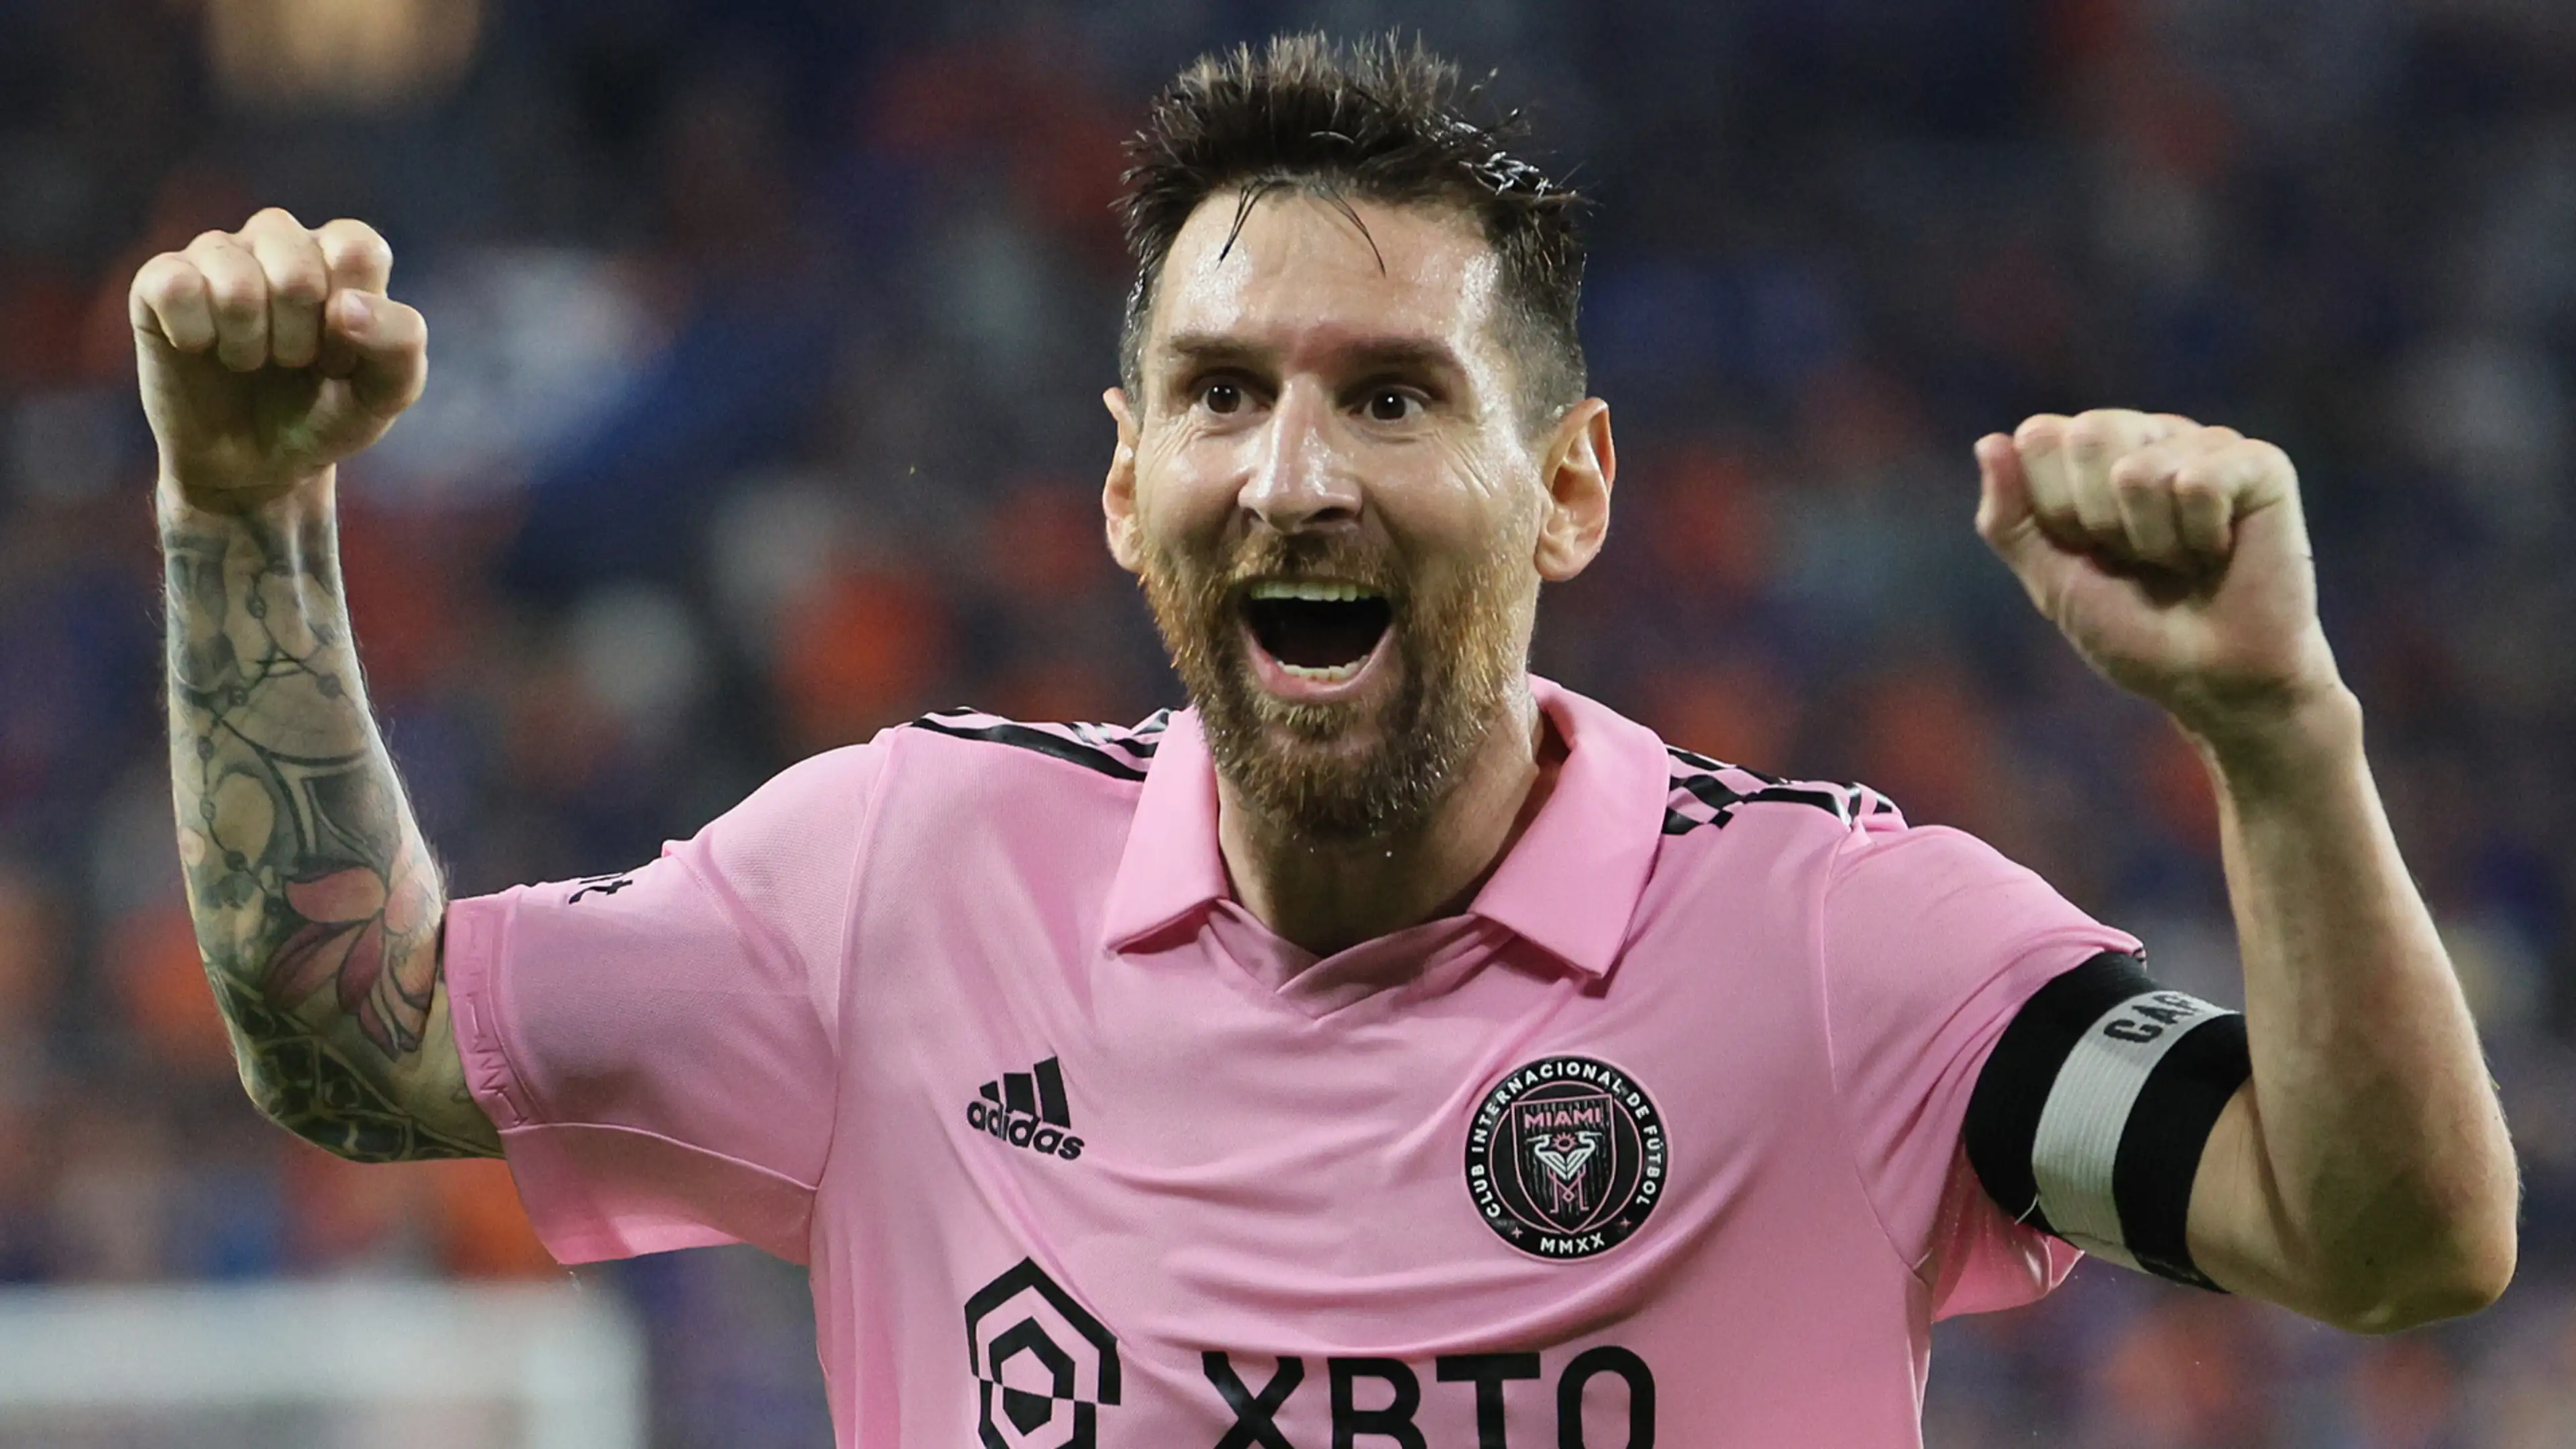 Messi Becomes Top Scorer Of World Cup 2026 Qualification In South America With 31 Goals